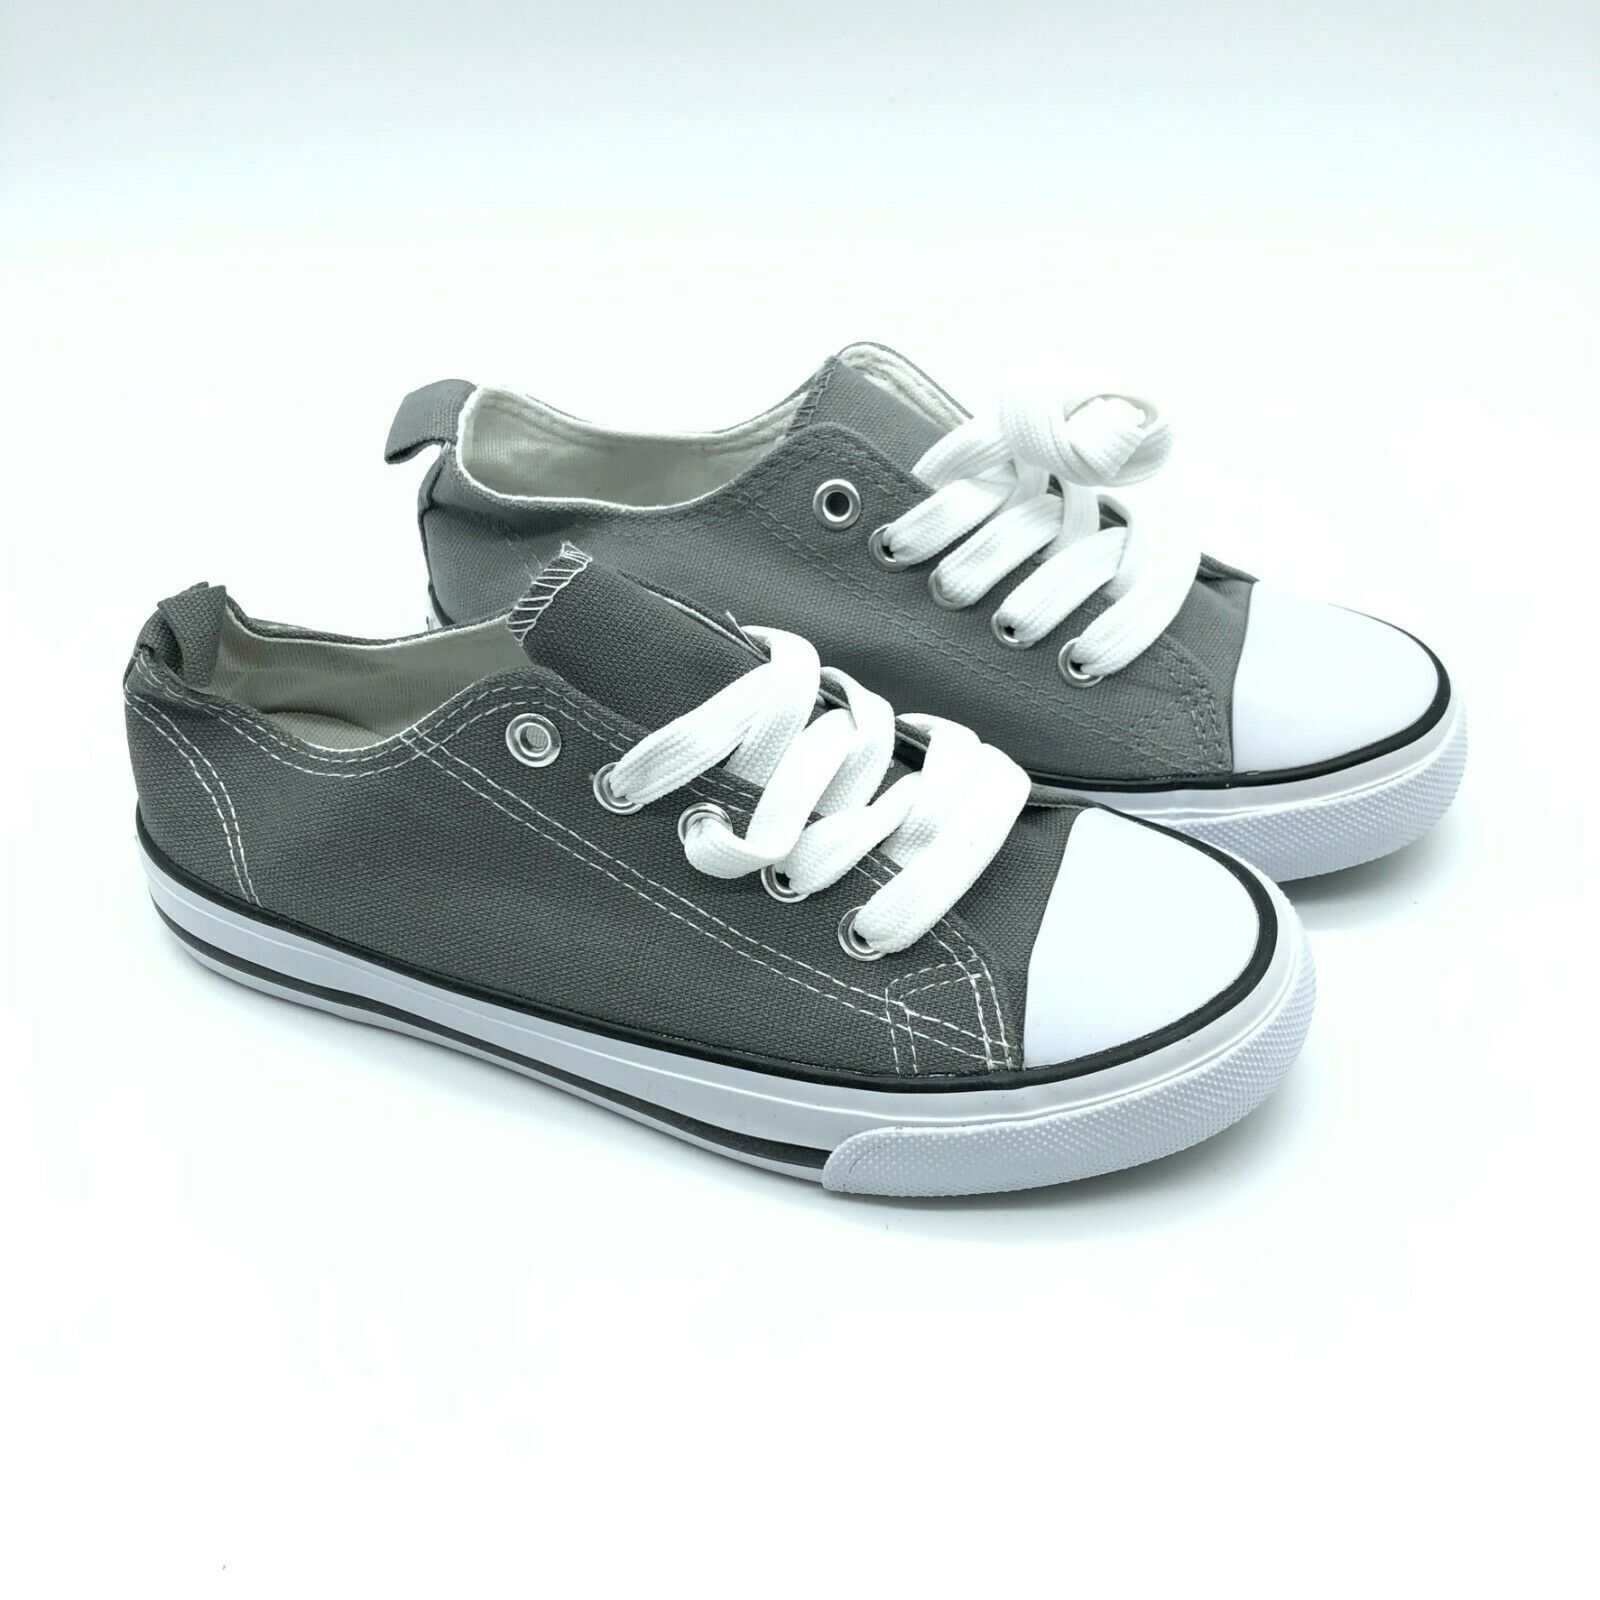 Zoogs Boys Girls Sneakers Canvas Low Top Lace Up Gray Size 3 - $14.49